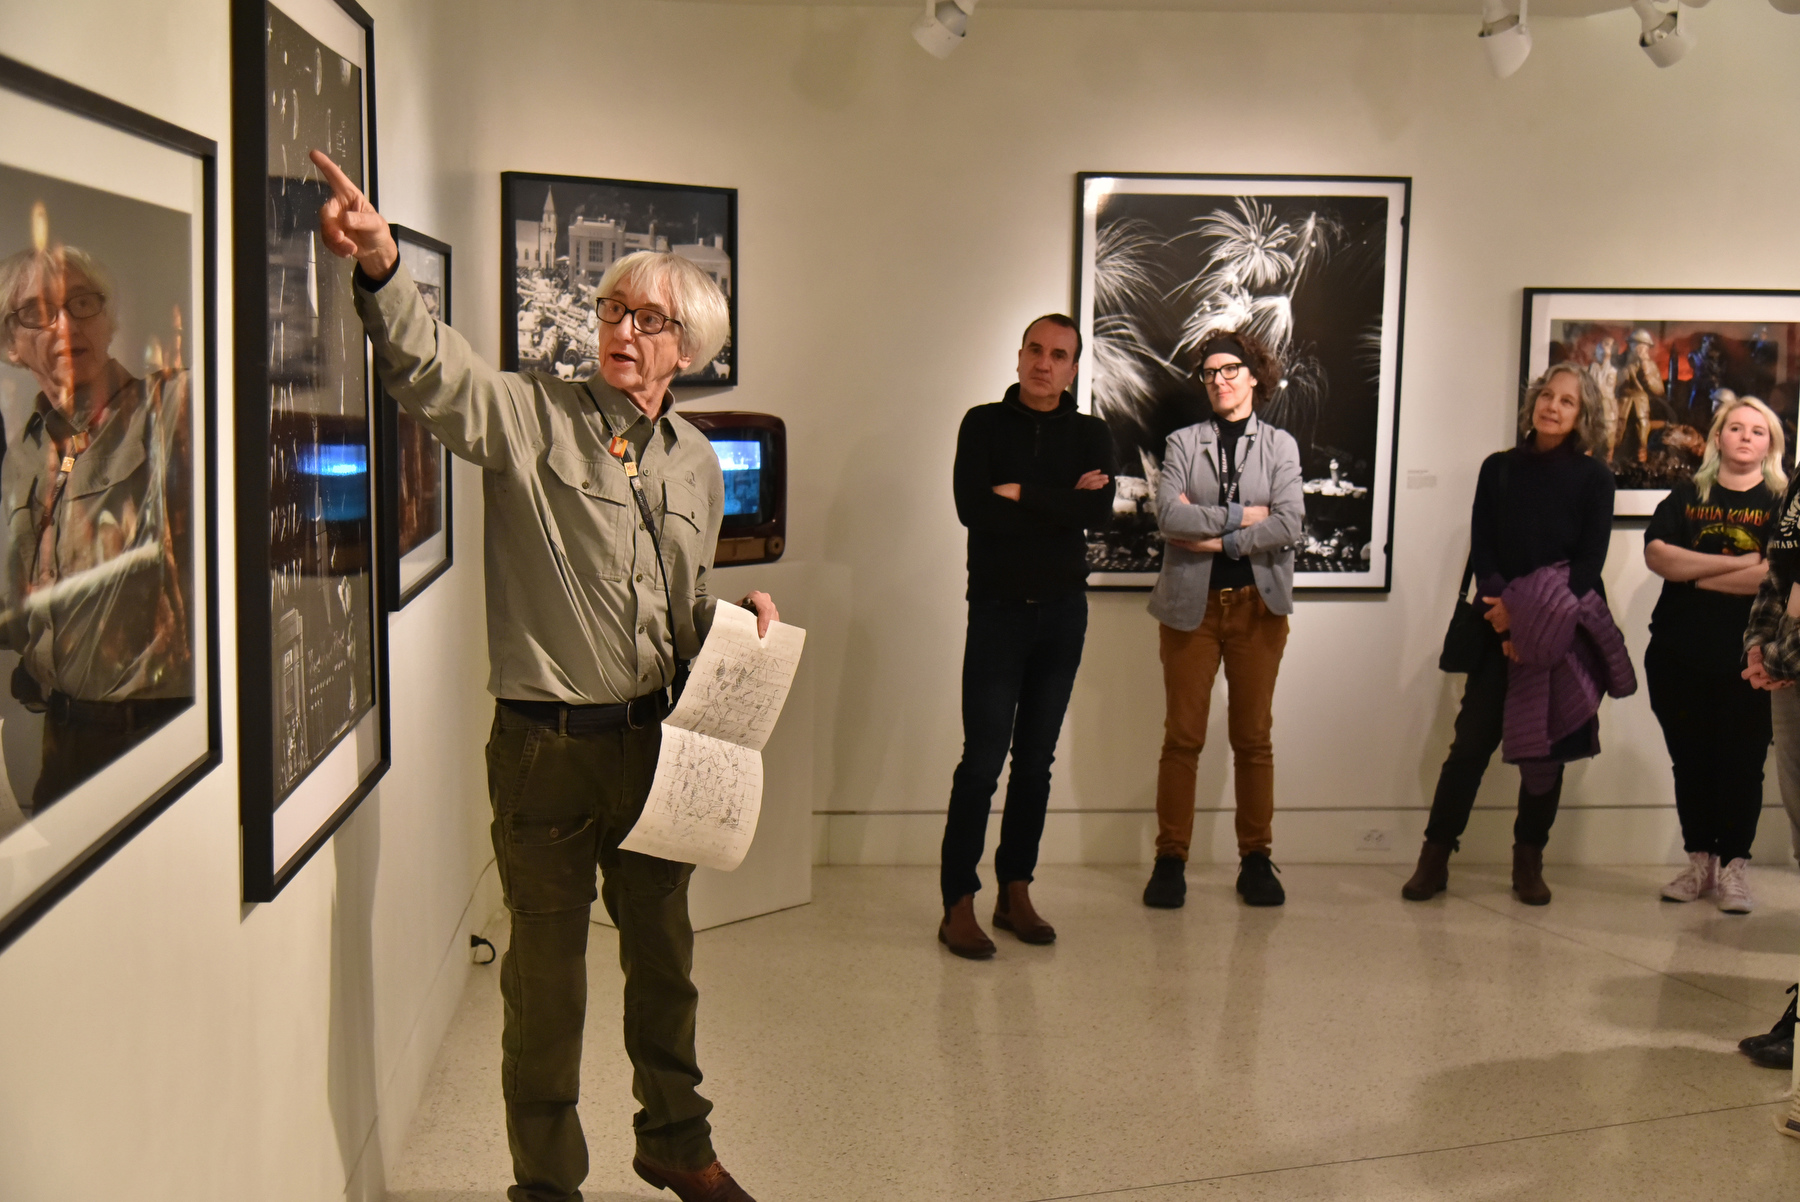 Syracuse area artist, photographer and educator Paul Pearce, who earned his master's degree from SUNY Oswego in 1982 and taught art and photography here from 2003 to 2013, led an artist's talk Feb. 15 about  "Fire for Effect" on exhibit in Tyler Art Gallery. 